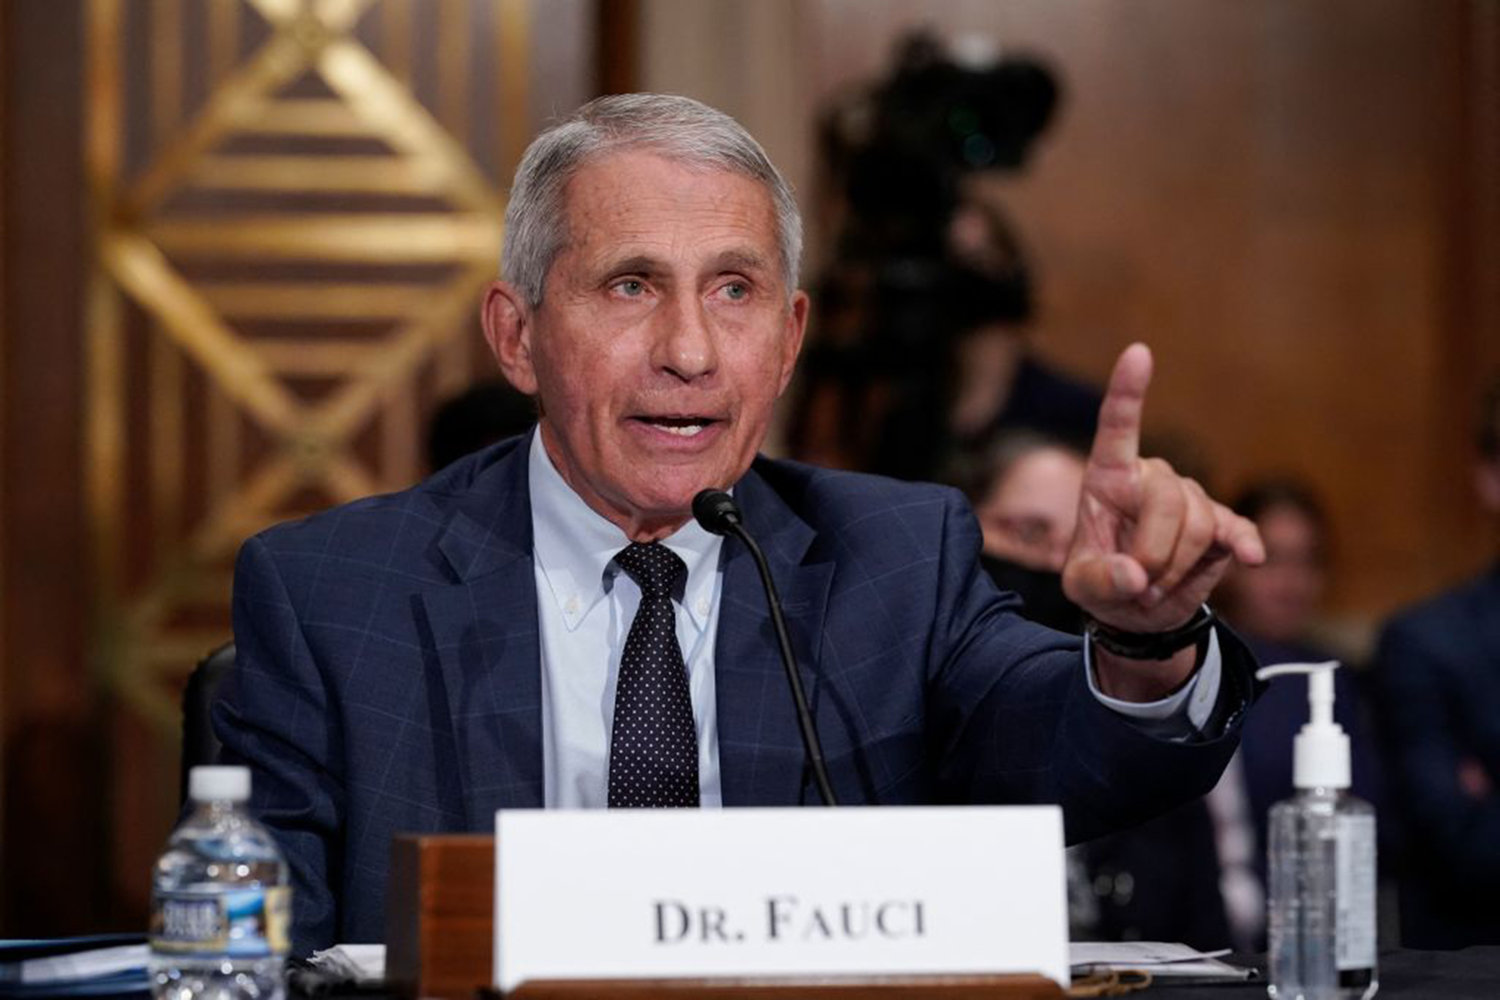 Dr. Anthony Fauci, director of the National Institute of Allergy and Infectious Diseases, responds to questions by Senator Rand Paul during the Senate Health, Education, Labor, and Pensions Committee hearing on Capitol Hill in Washington, DC on July 20, 2021. (J. Scott Applewhite/Pool/AFP via Getty Images/TNS)